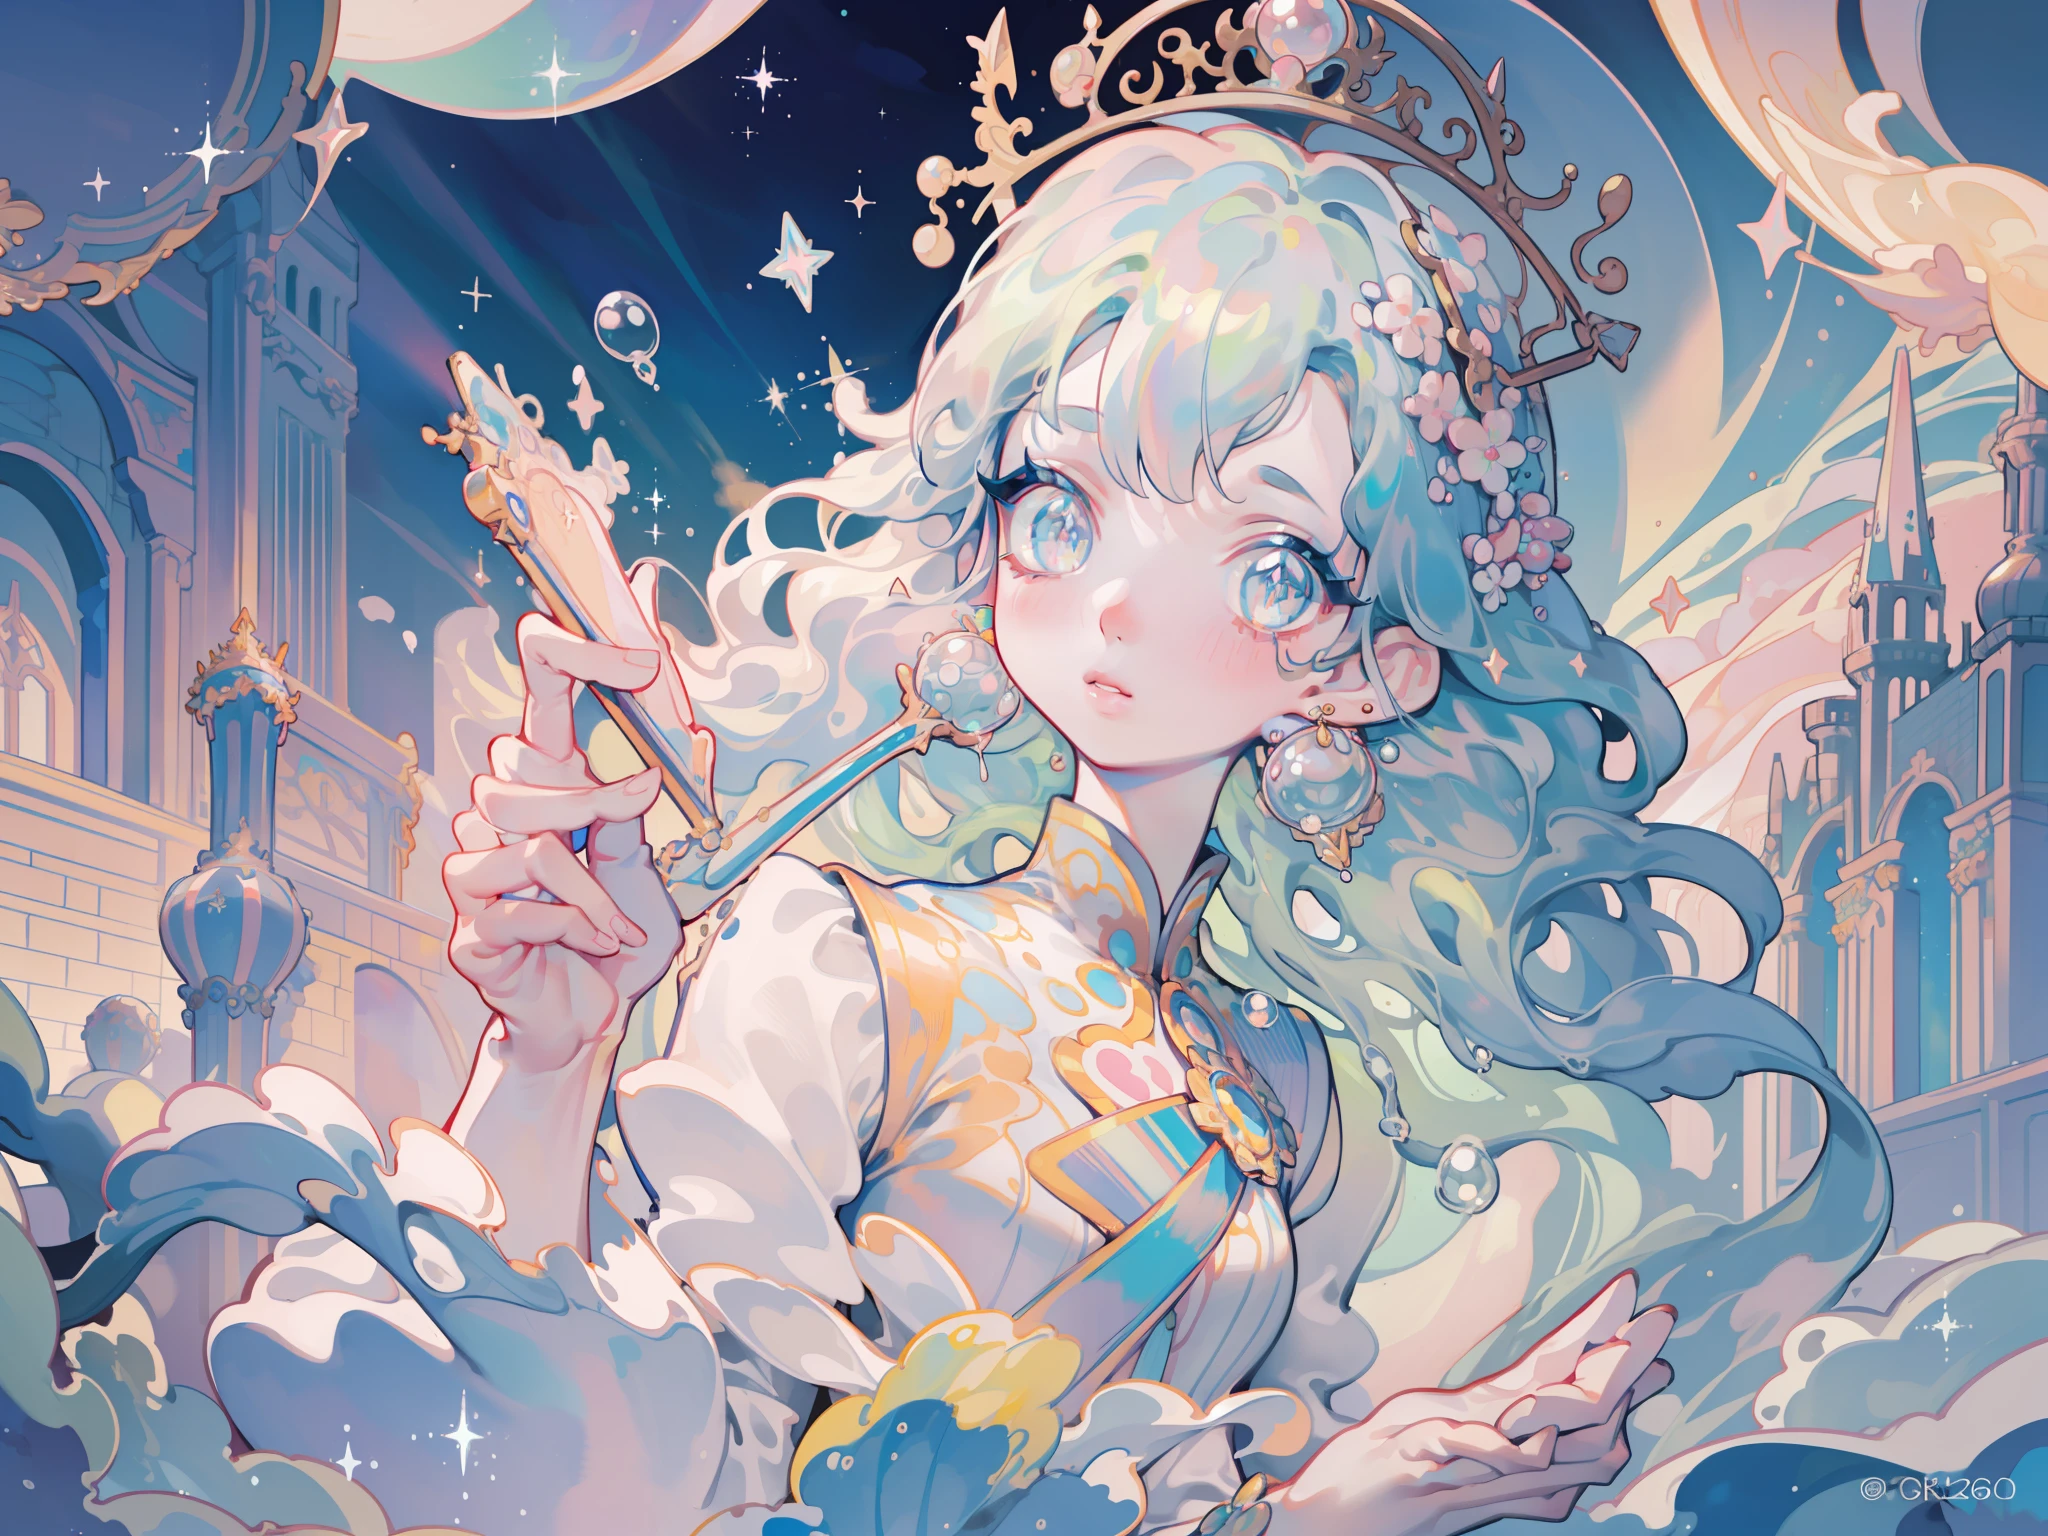 masterpiece, best quality, 8k resolution, sharp focus, intricate detail, beautiful girl, sparkling eyes, golden ratio face, otherworldly liquid, watercolor, ((pastel colors)), bright colors, whimsical, colorful, sharp focus, high resolution, fine detail, princess fantasy ballgown, ((round eyes)), iridescent bubbles, castle landscape in background, (portrait)